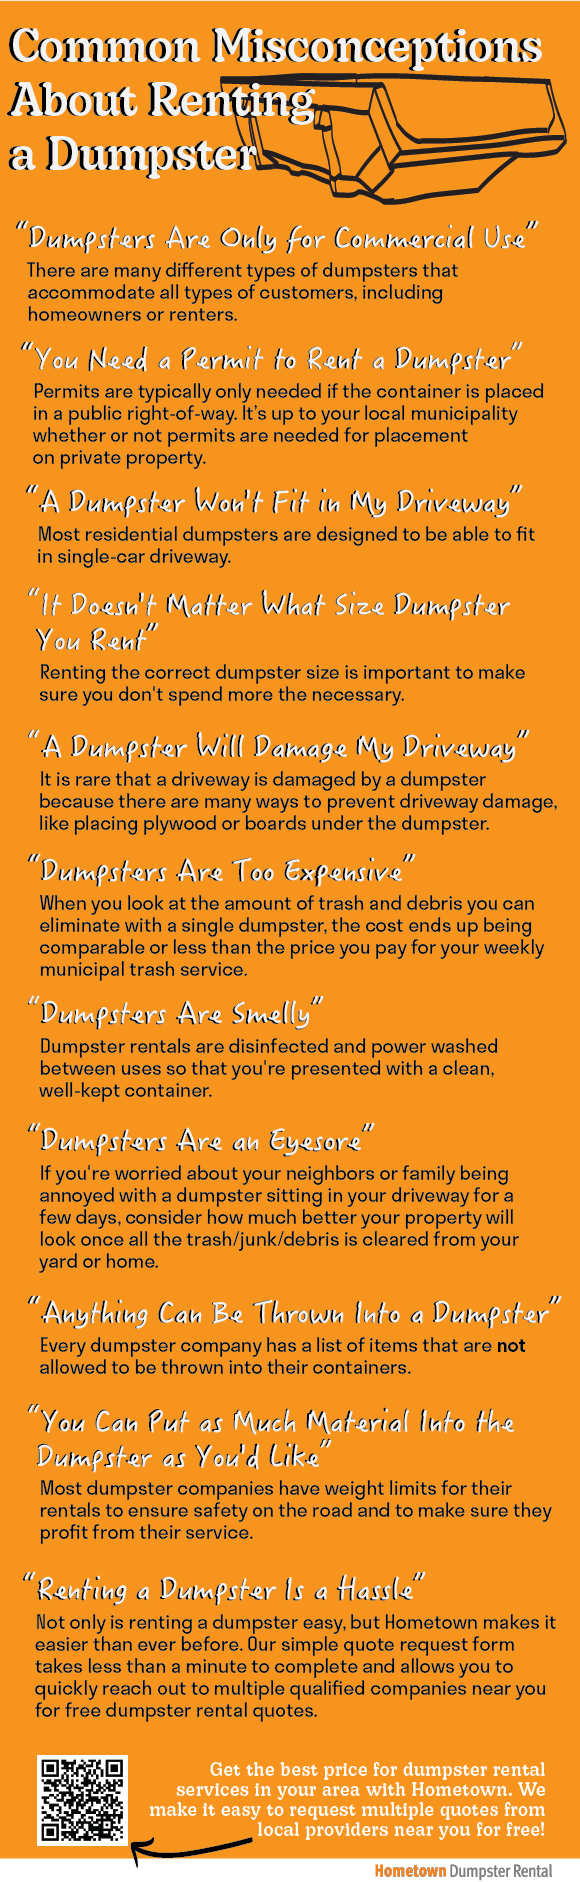 Common Misconceptions About Renting a Dumpster Infographic